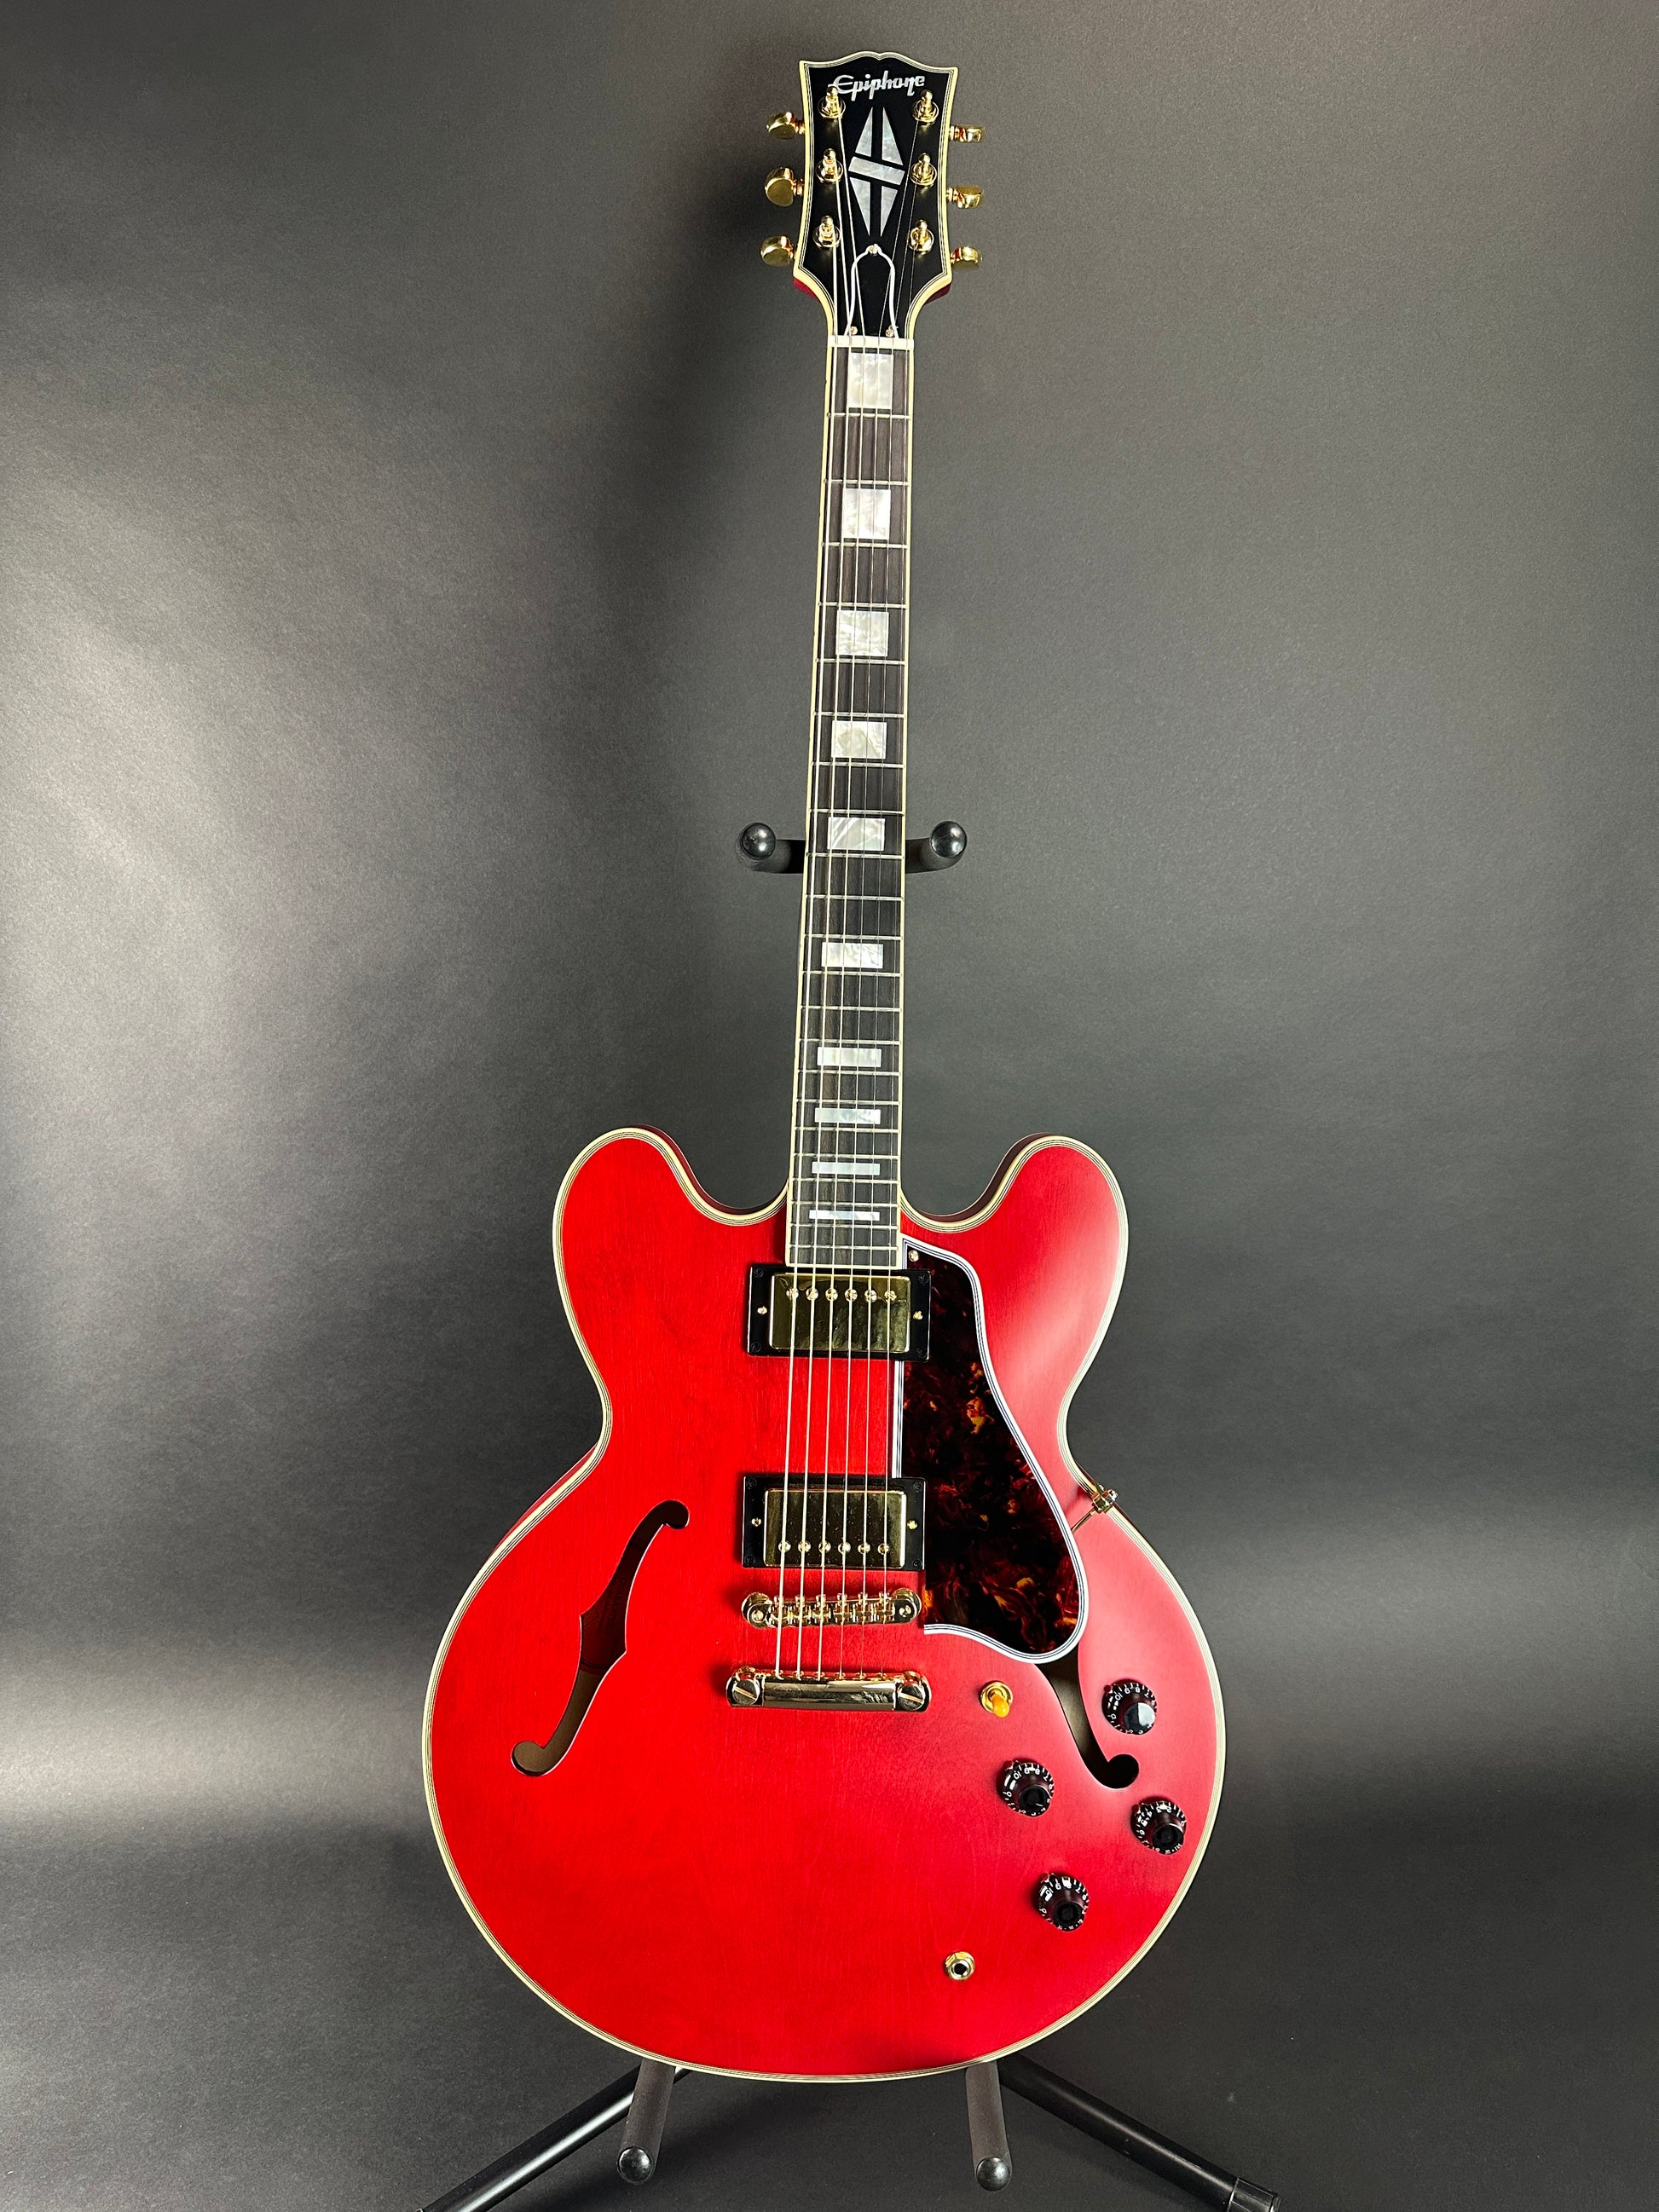 Full front of Used Epiphone "Inspired by Gibson" Custom 1959 ES-355 Cherry Red.